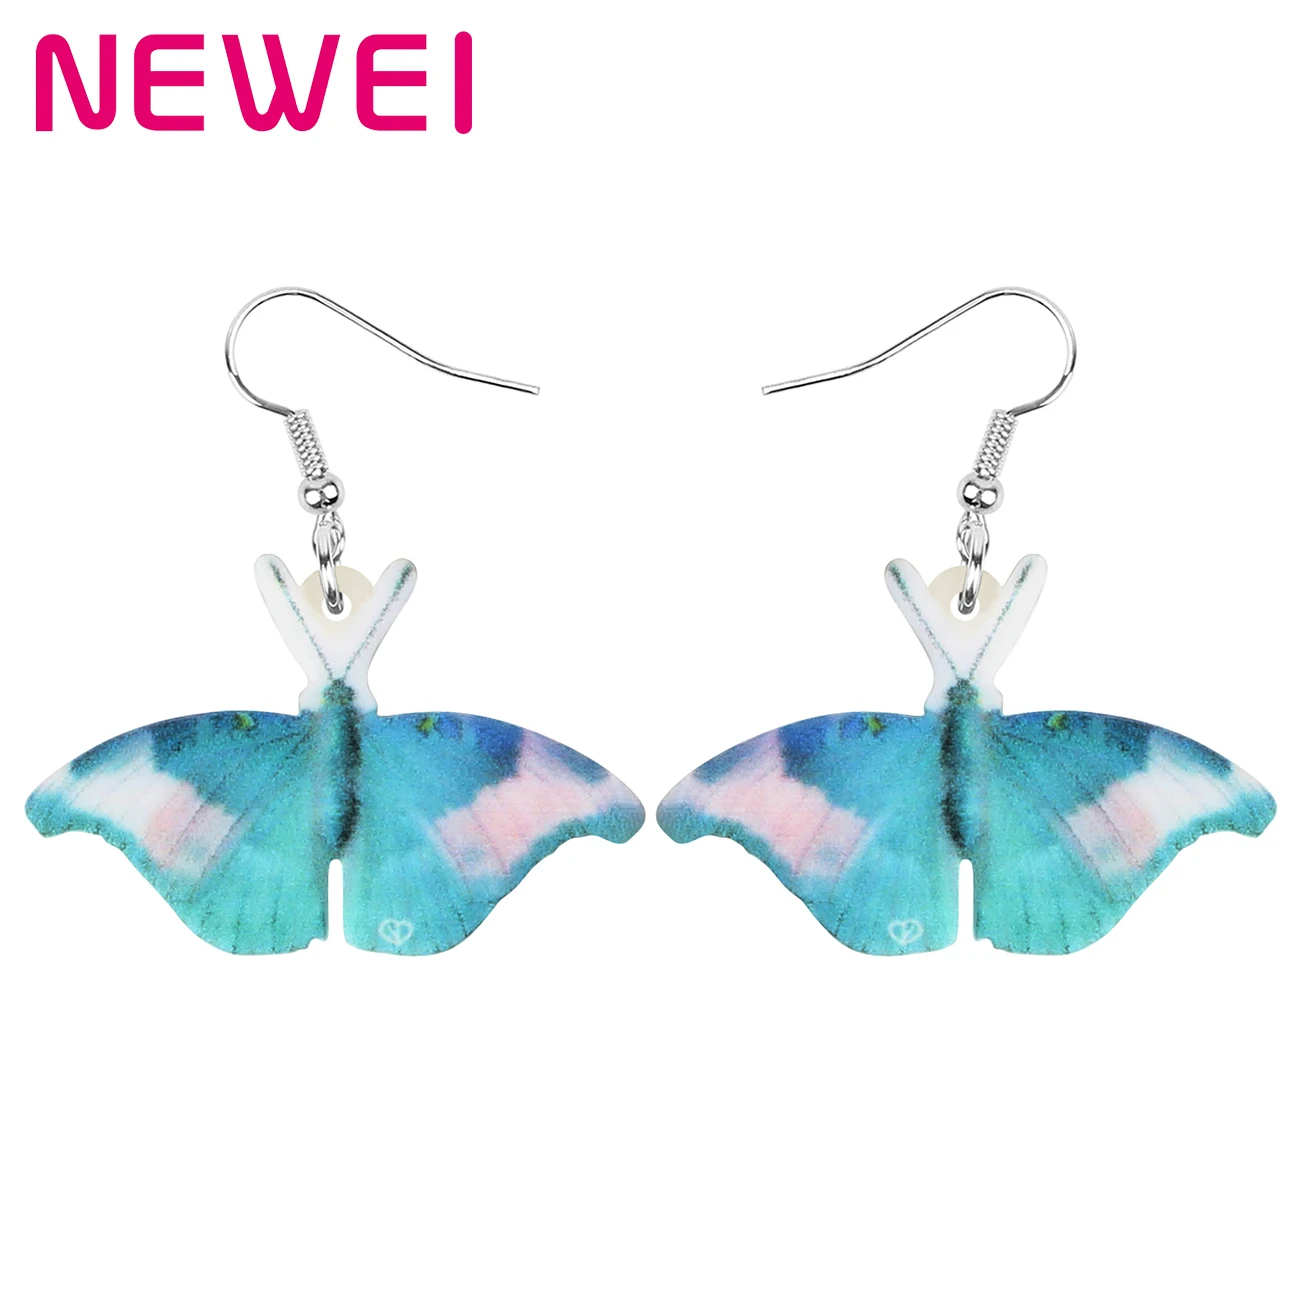 

Acrylic Lovely Blue Morpho Butterfly Earrings Insect Drop Dangle Fashion Animals Jewelry For Women Girls Kids Teens Charms Gifts